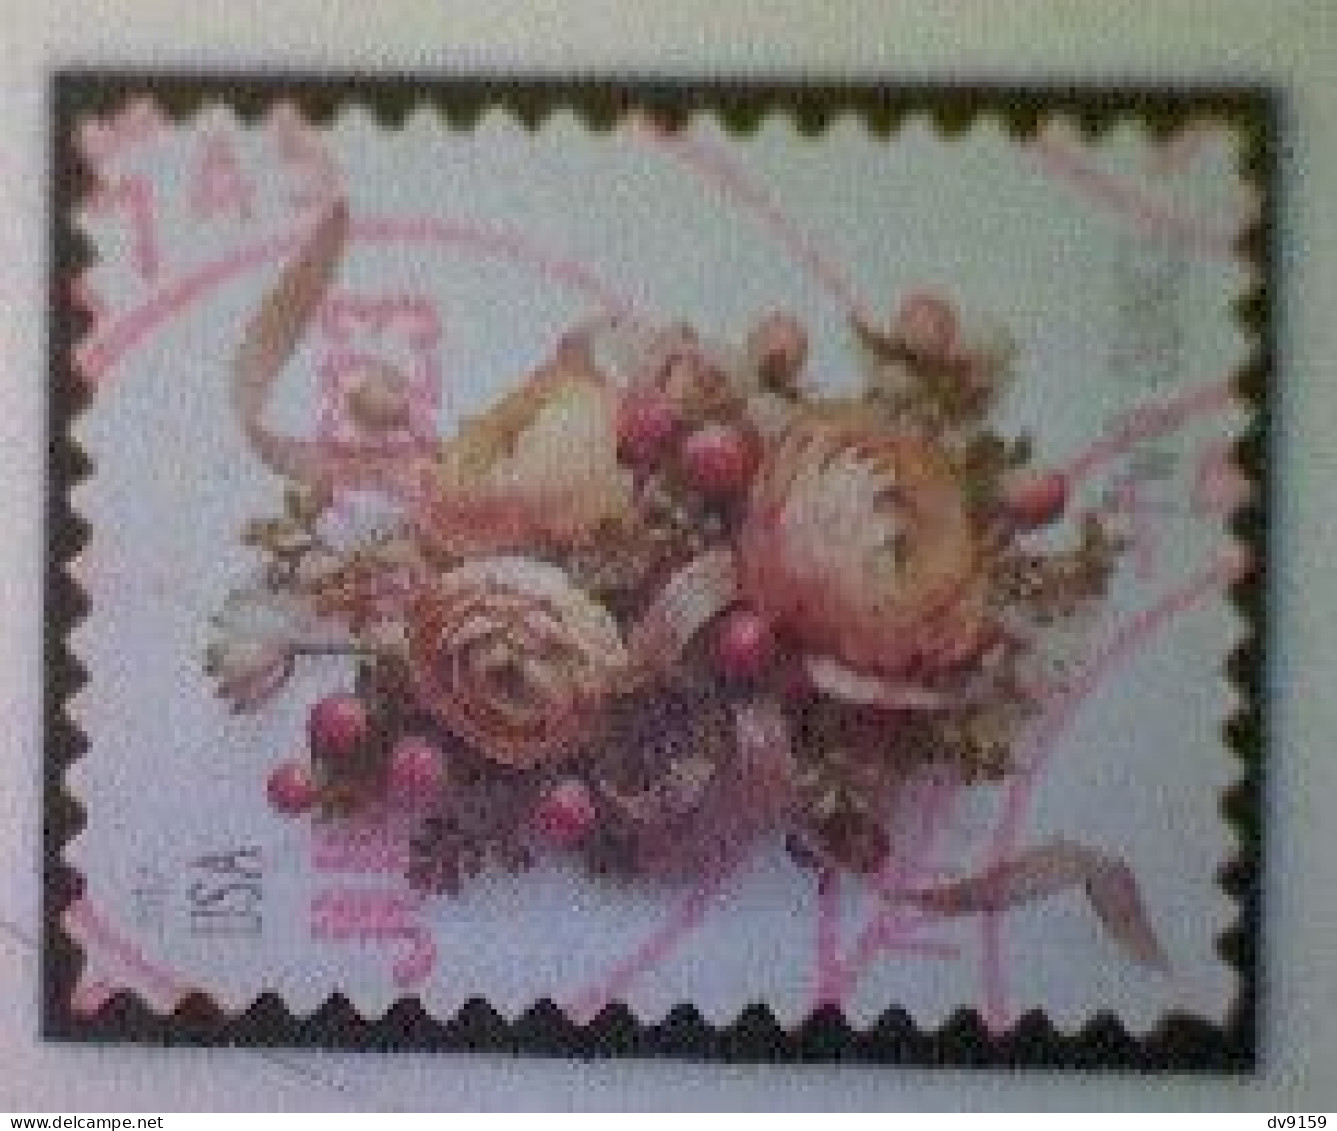 United States, Scott #5200, Used(o), 2017, Floral Corsage, (70¢), Multicolored - Usados